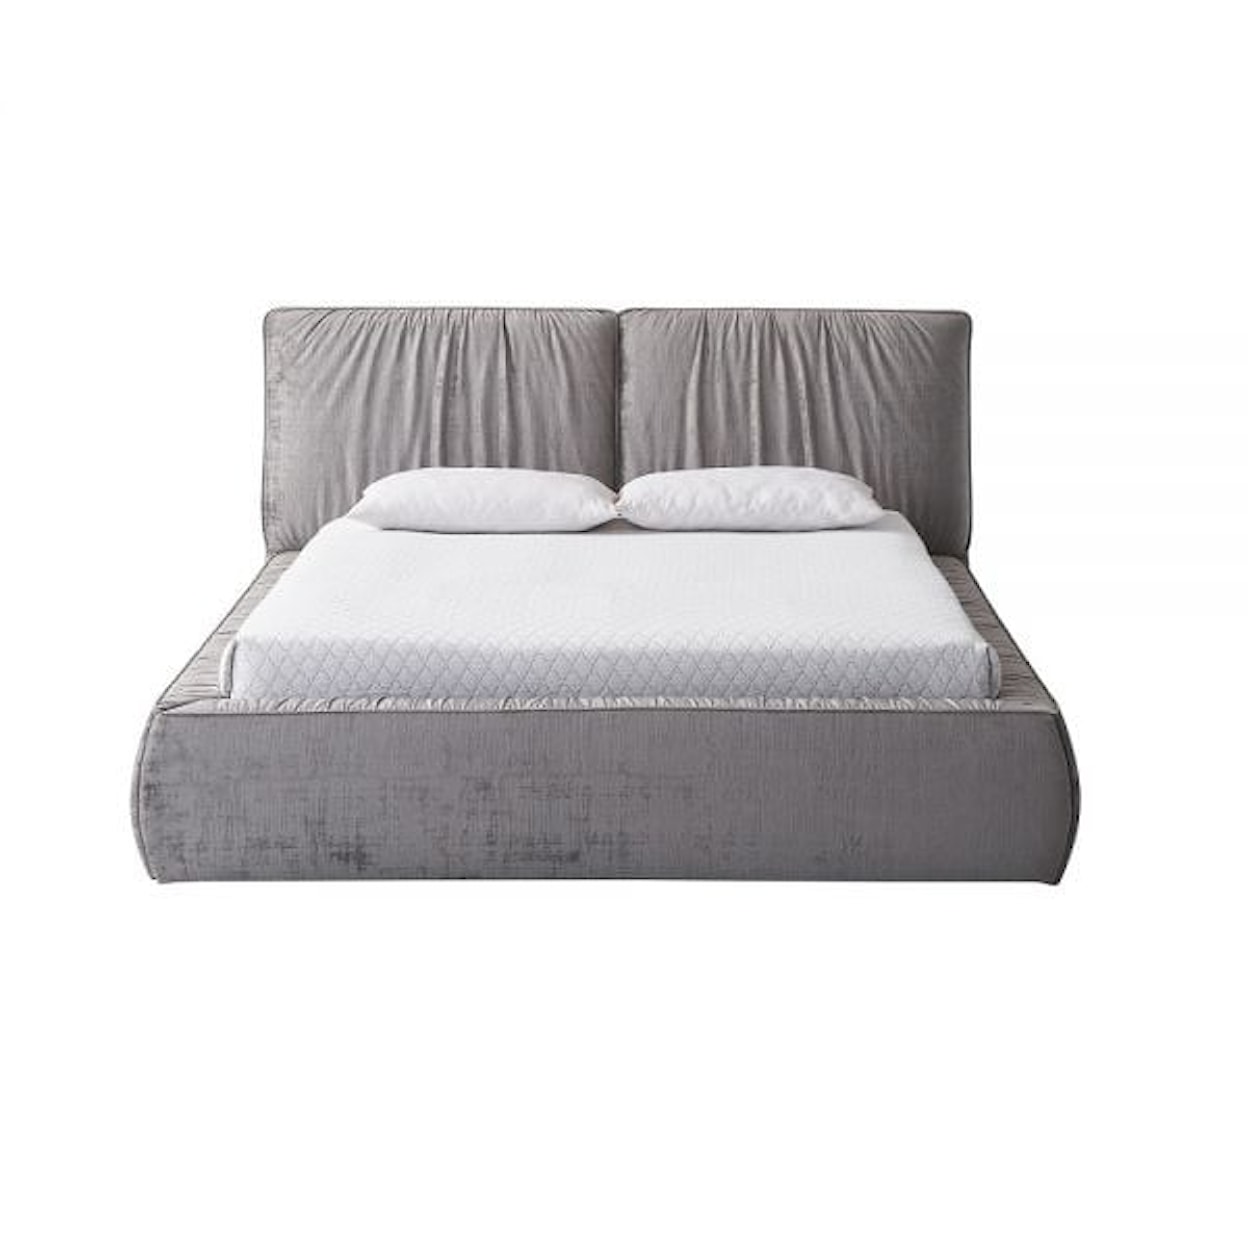 Acme Furniture Onfroi Queen Upholstered Bed